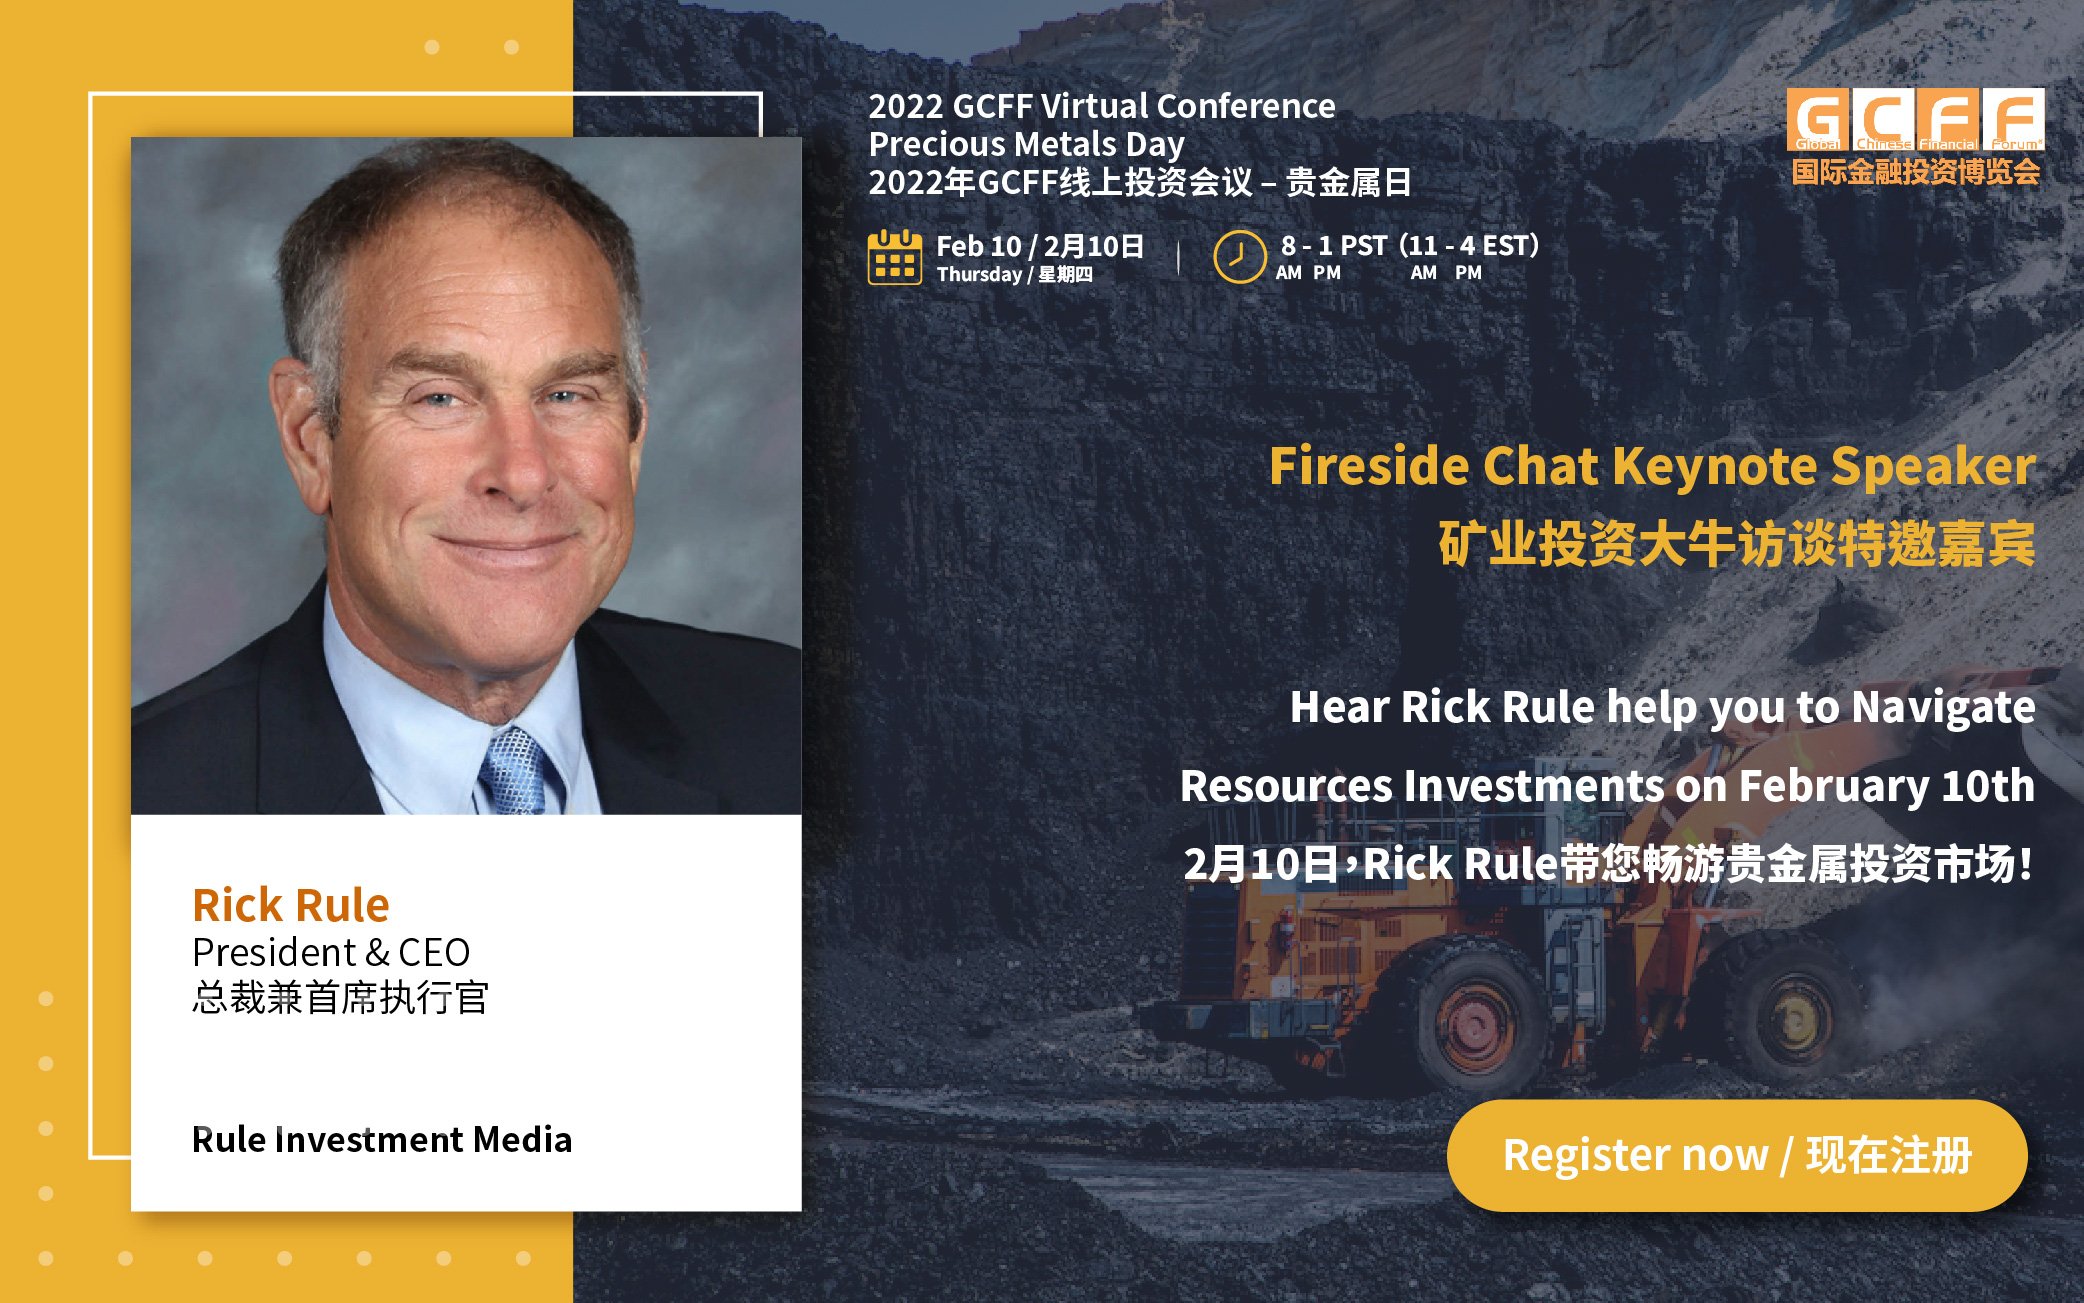 Hear Rick Rule help you to Navigate Resources Investments on February 10th